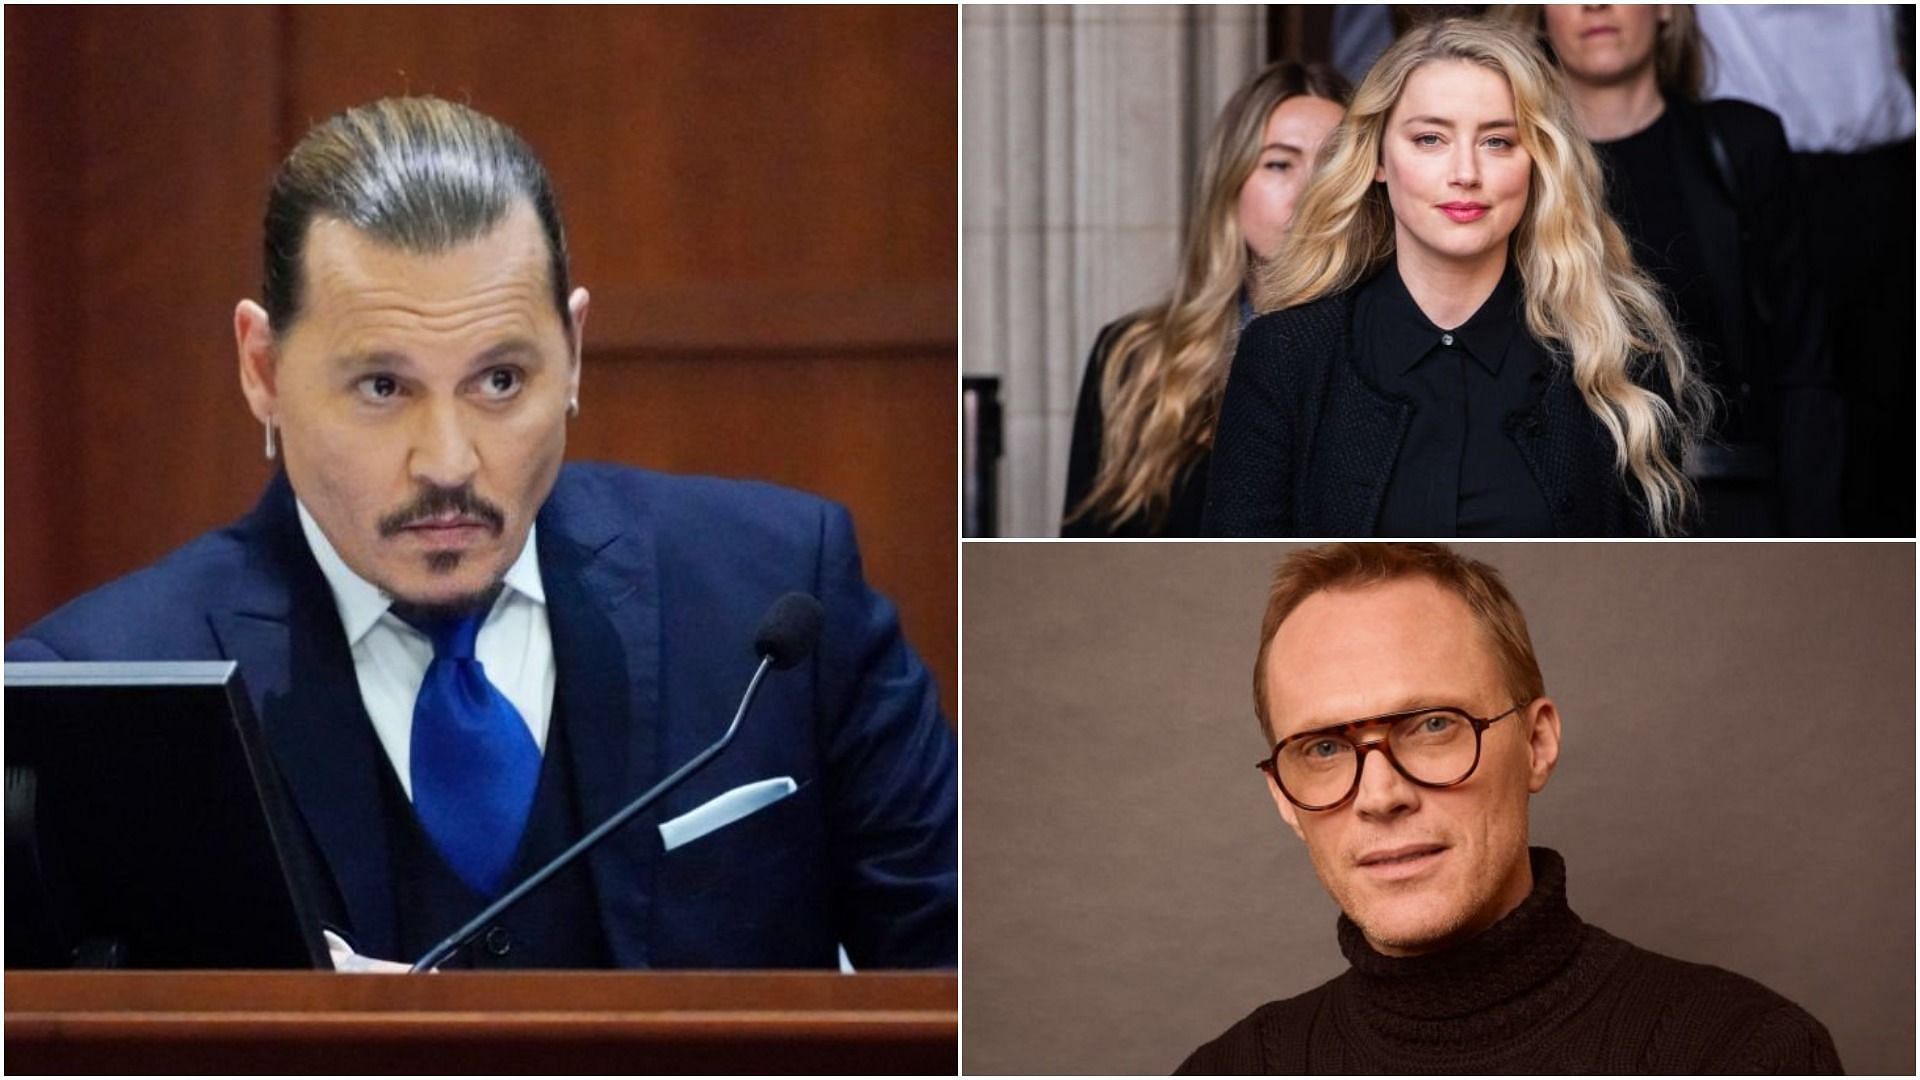 Johnny Depp says that Amber Heard despised Paul Bettany and demeaned his son (Images via Steve Helber, Samir Hussein and Emily Assiran/Getty Images)